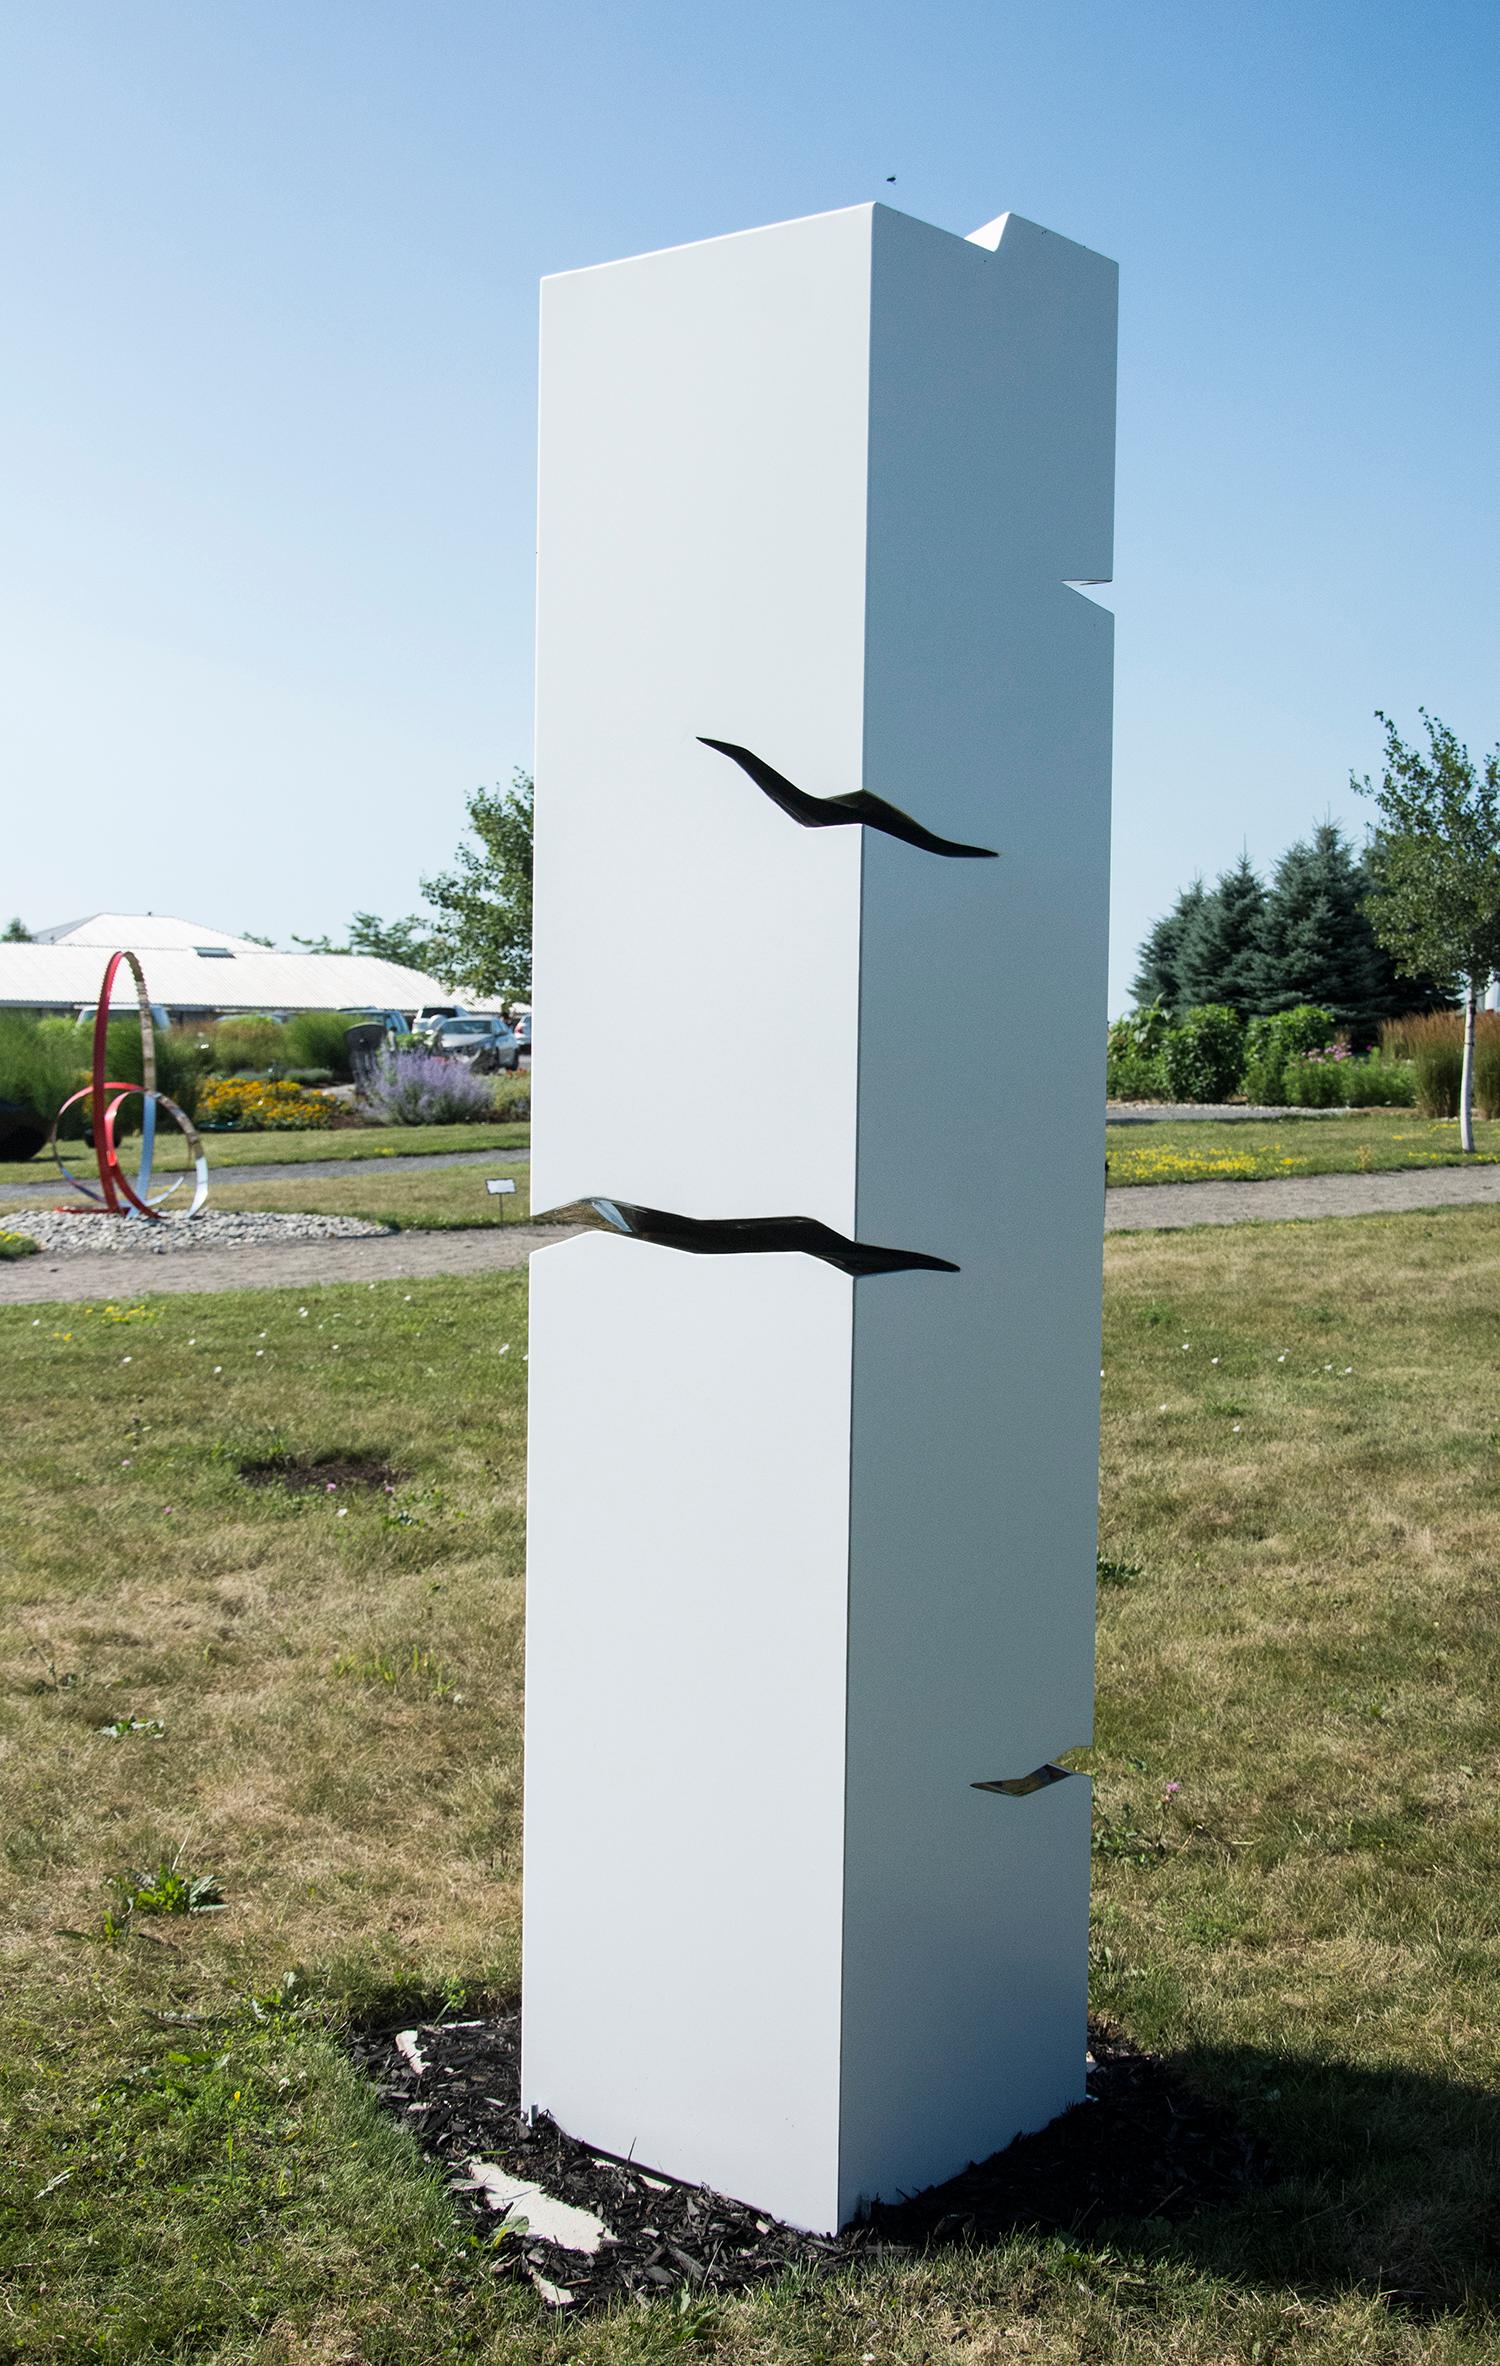 A pillar of stainless steel is coated white in this minimalist outdoor sculpture by Philippe Pallafray. The sculpture is designed with jagged polished cracks in the steel that glint in the sunlight. The artist ascribed meaning to reflected light by